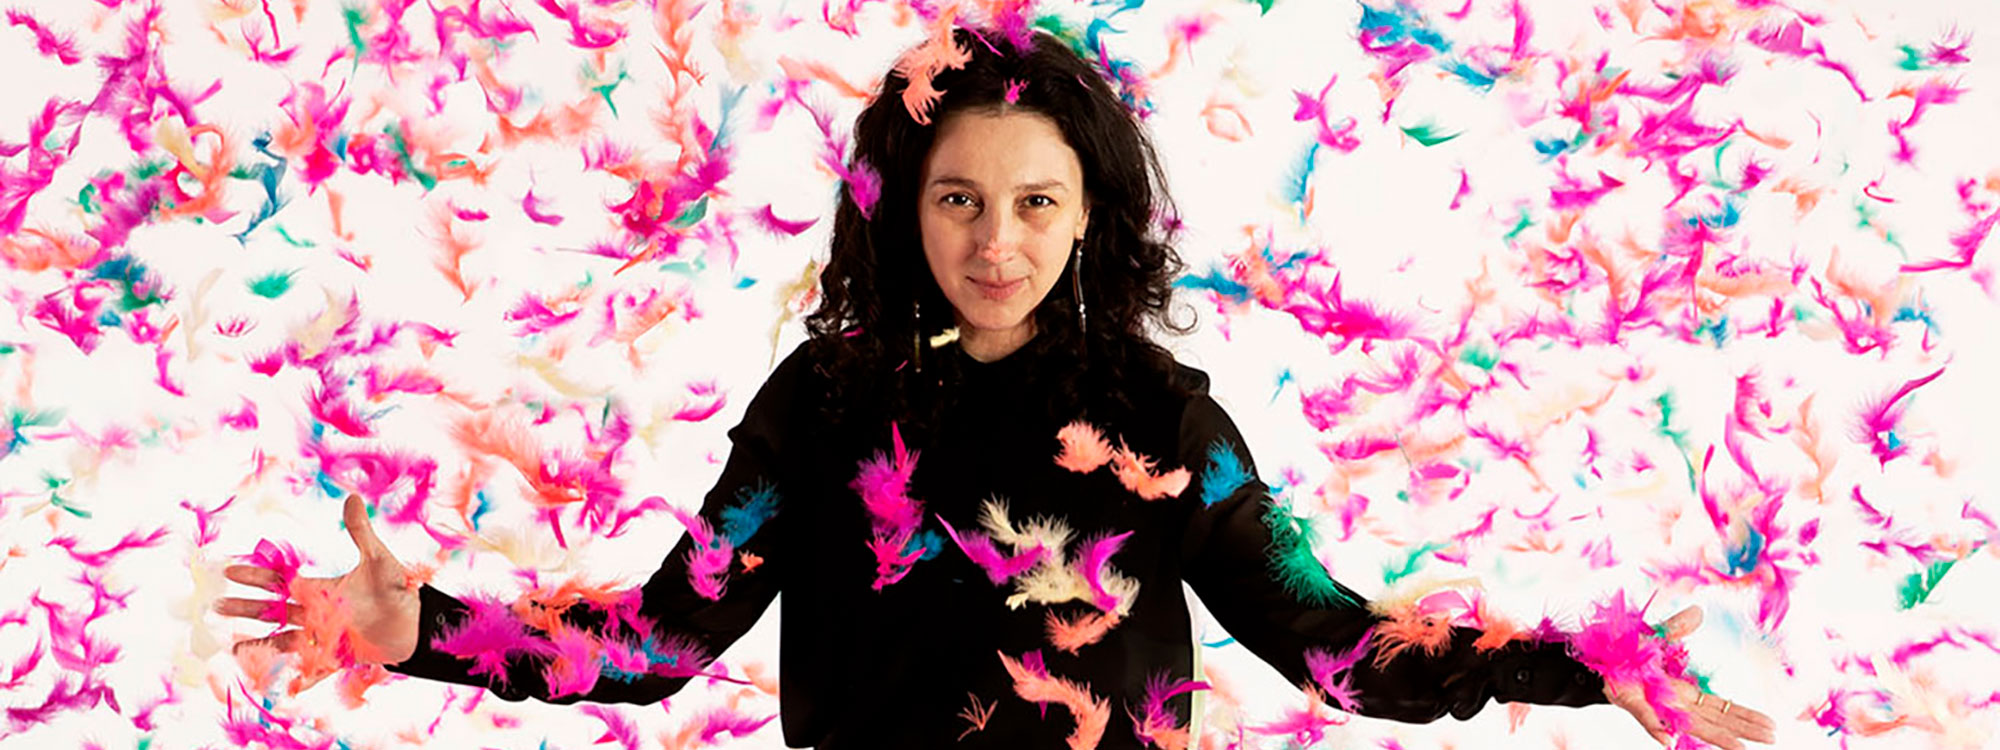 Artist Paola Pivi standing with feathers falling around her